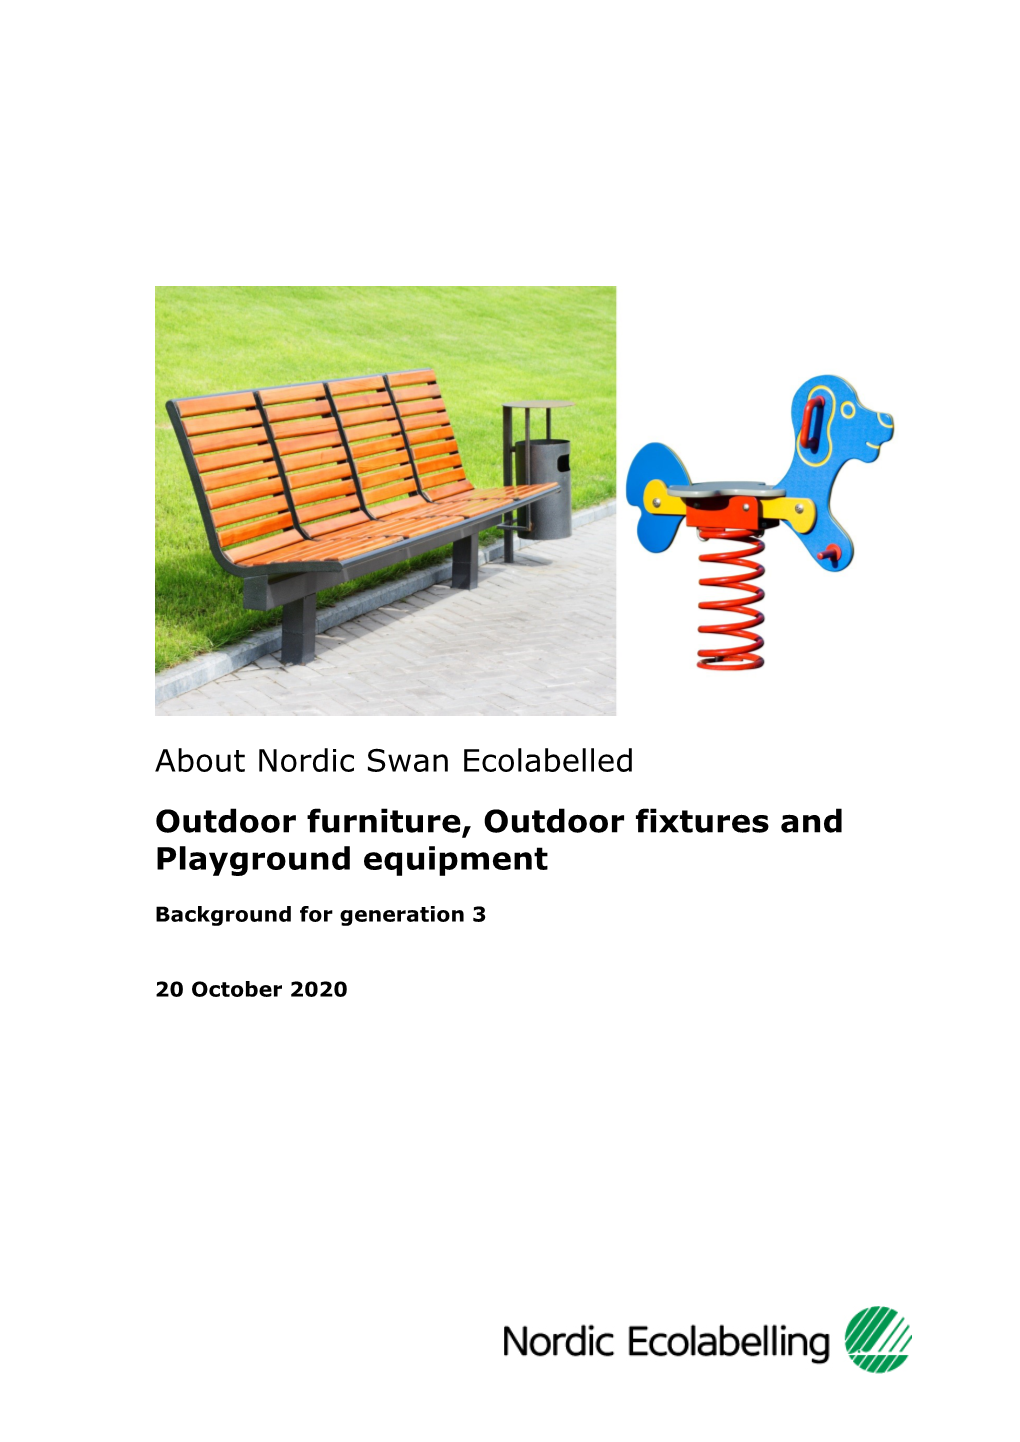 About Nordic Swan Ecolabelled Outdoor Furniture, Outdoor Fixtures